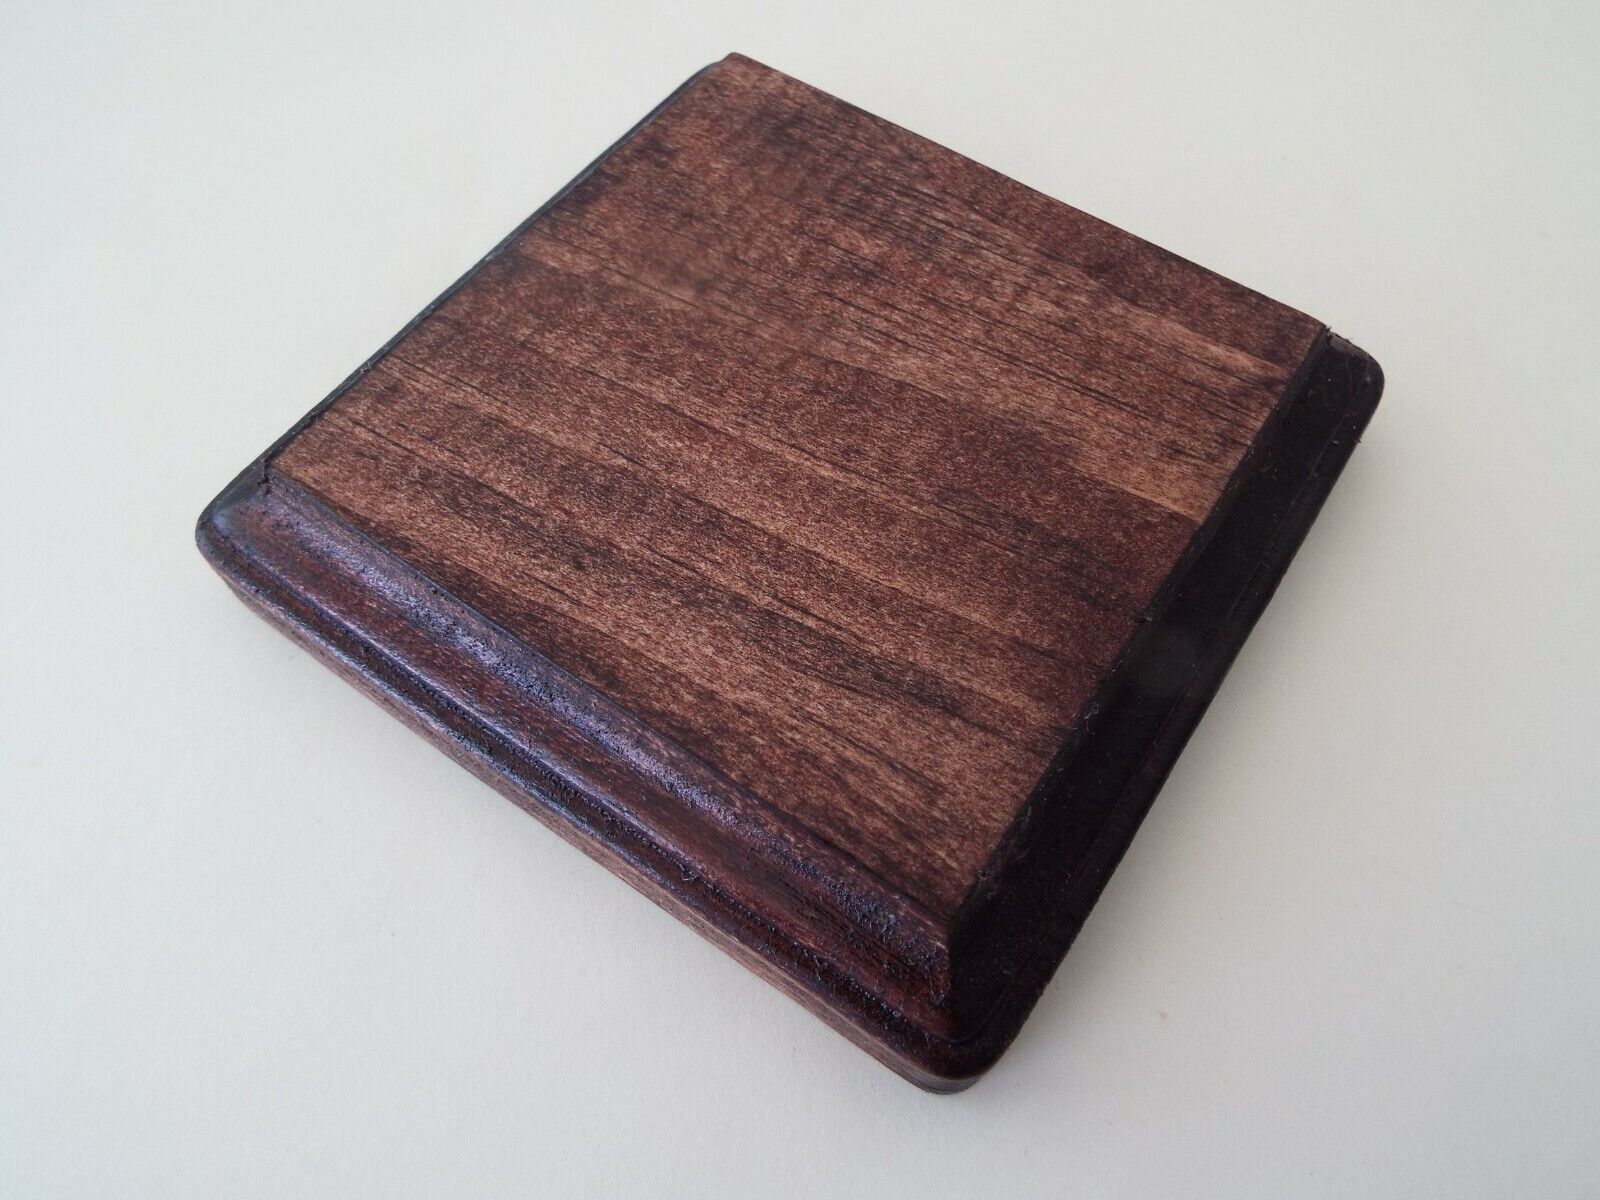 Large Mahogany Finish Square Wood Display Plaque. Display Stand.